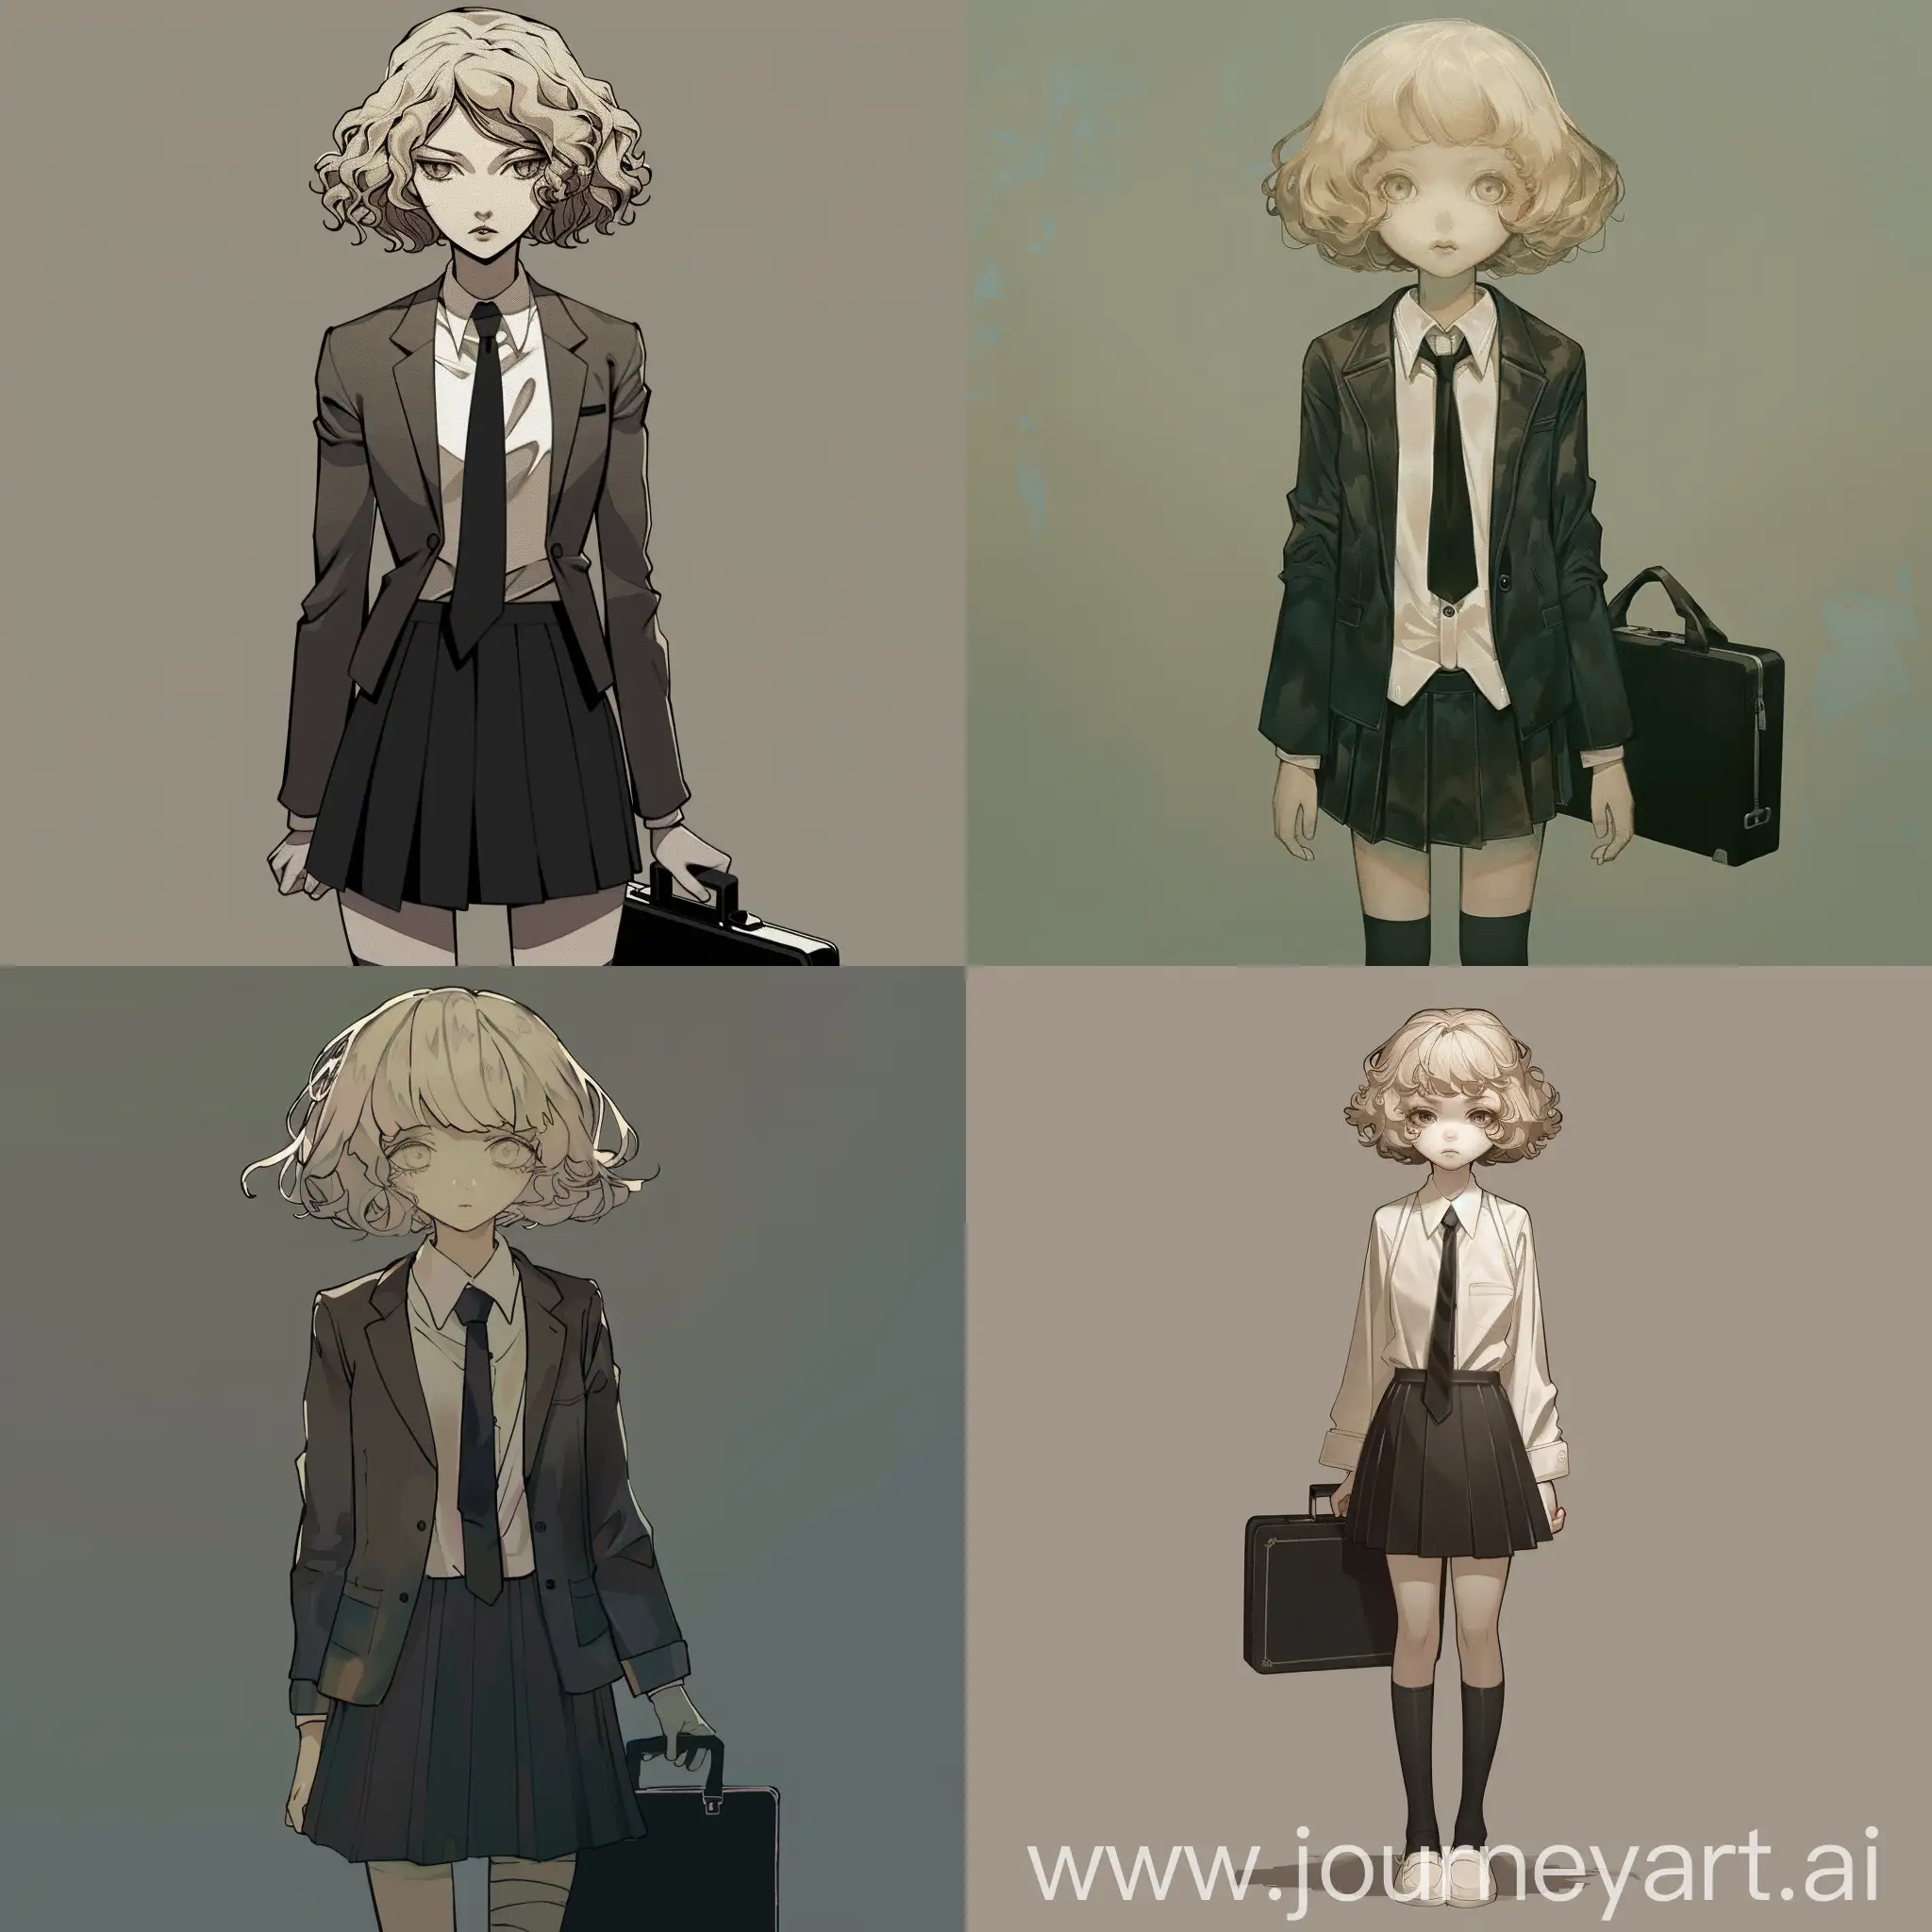 PaleSkinned-Businesswoman-Keiko-with-ChocolateColored-Hair-and-Briefcase